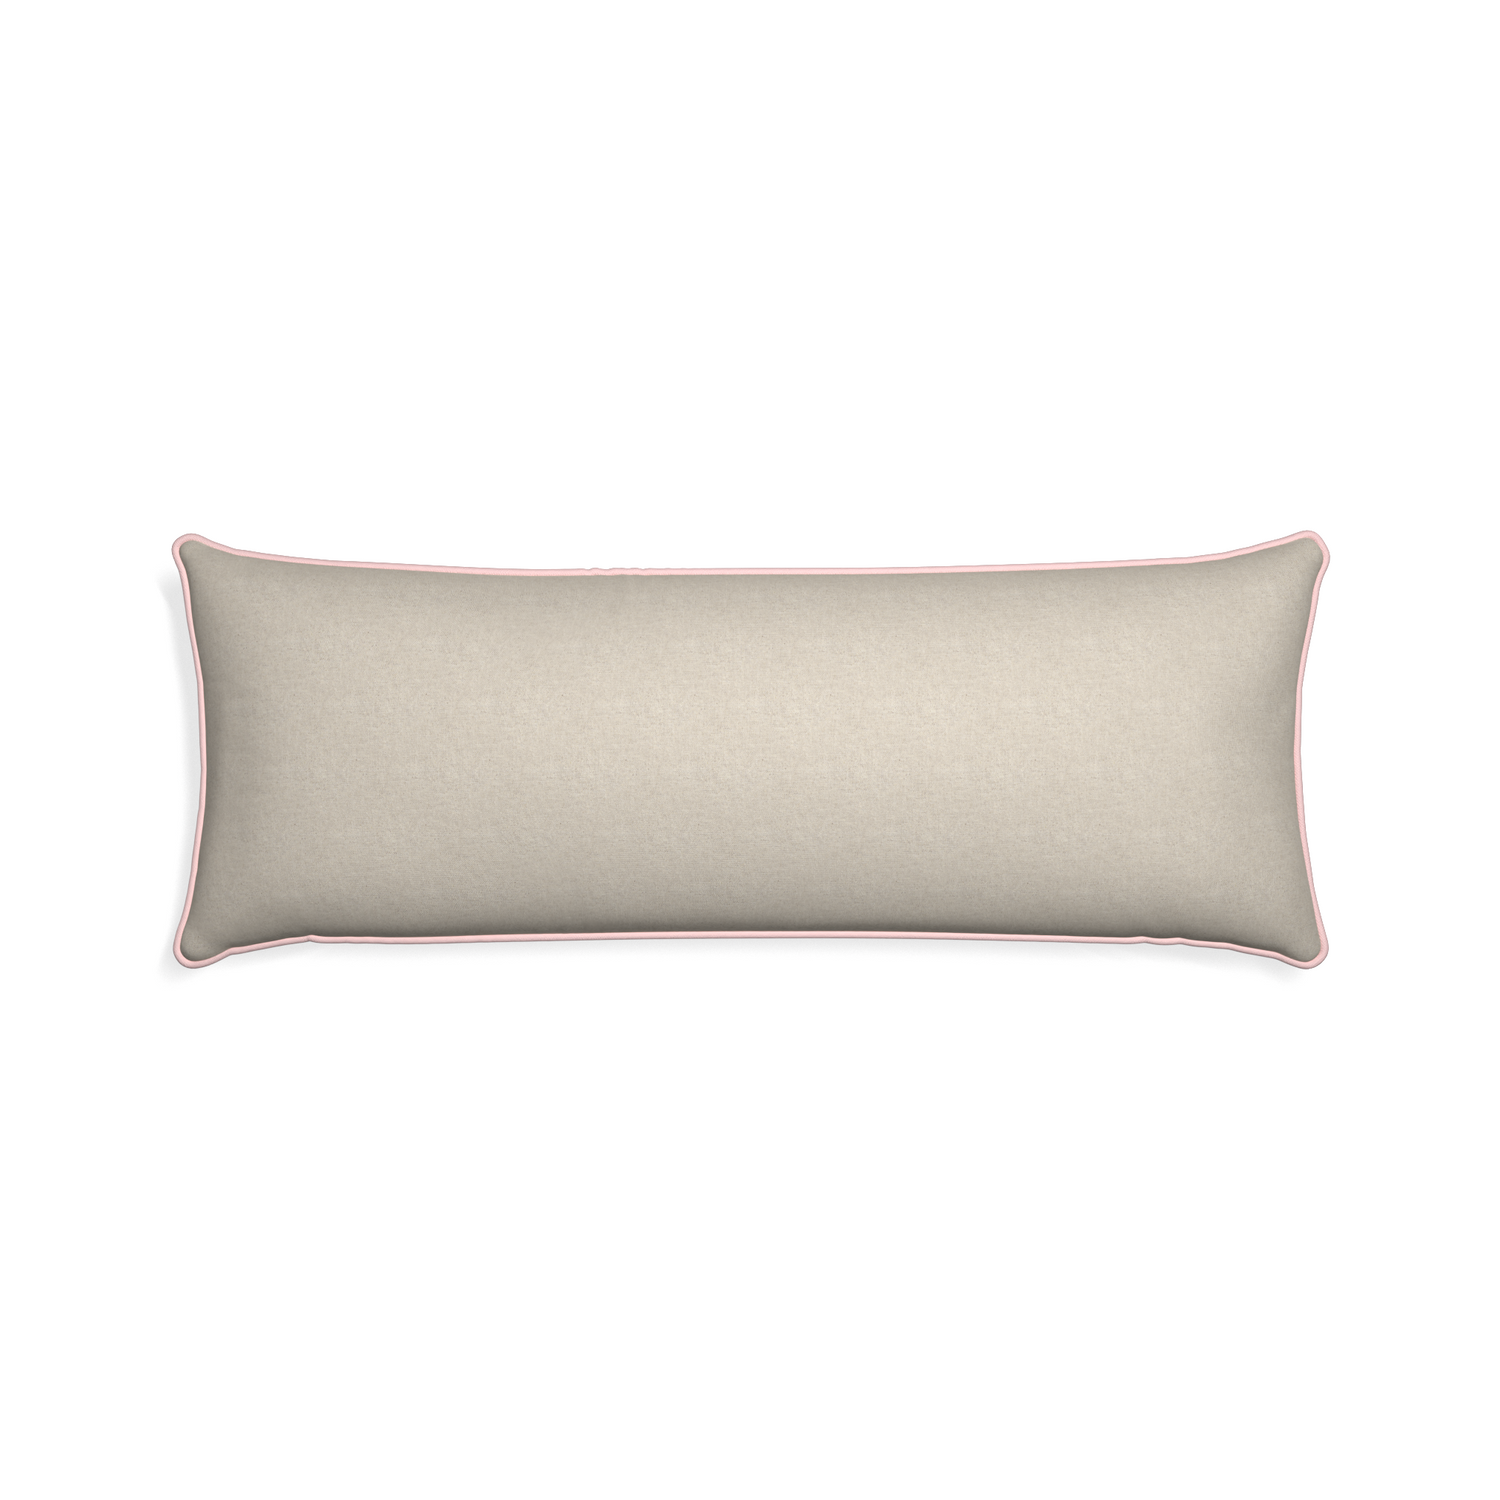 Xl-lumbar oat custom light brownpillow with petal piping on white background